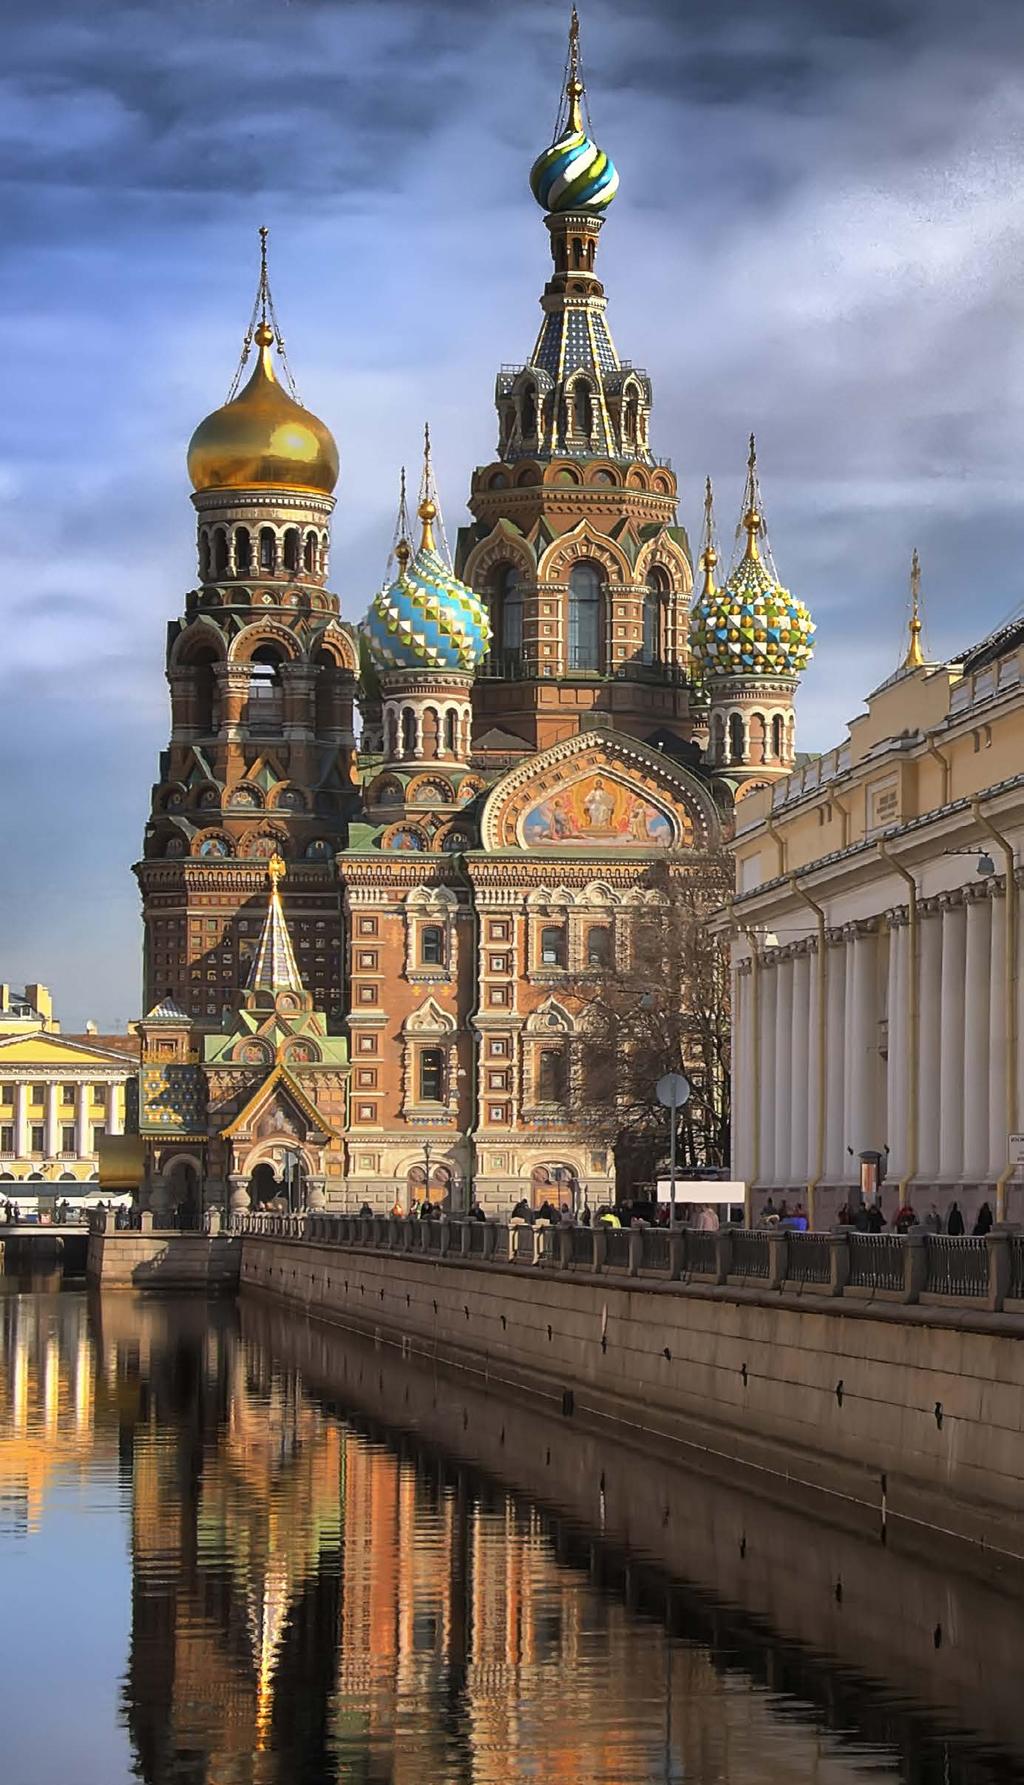 EDITORIAL See you in Saint Petersburg in 2019! Saint Petersburg has been selected to be the host of the 23rd session of the UNWTO General Assembly in 2019.